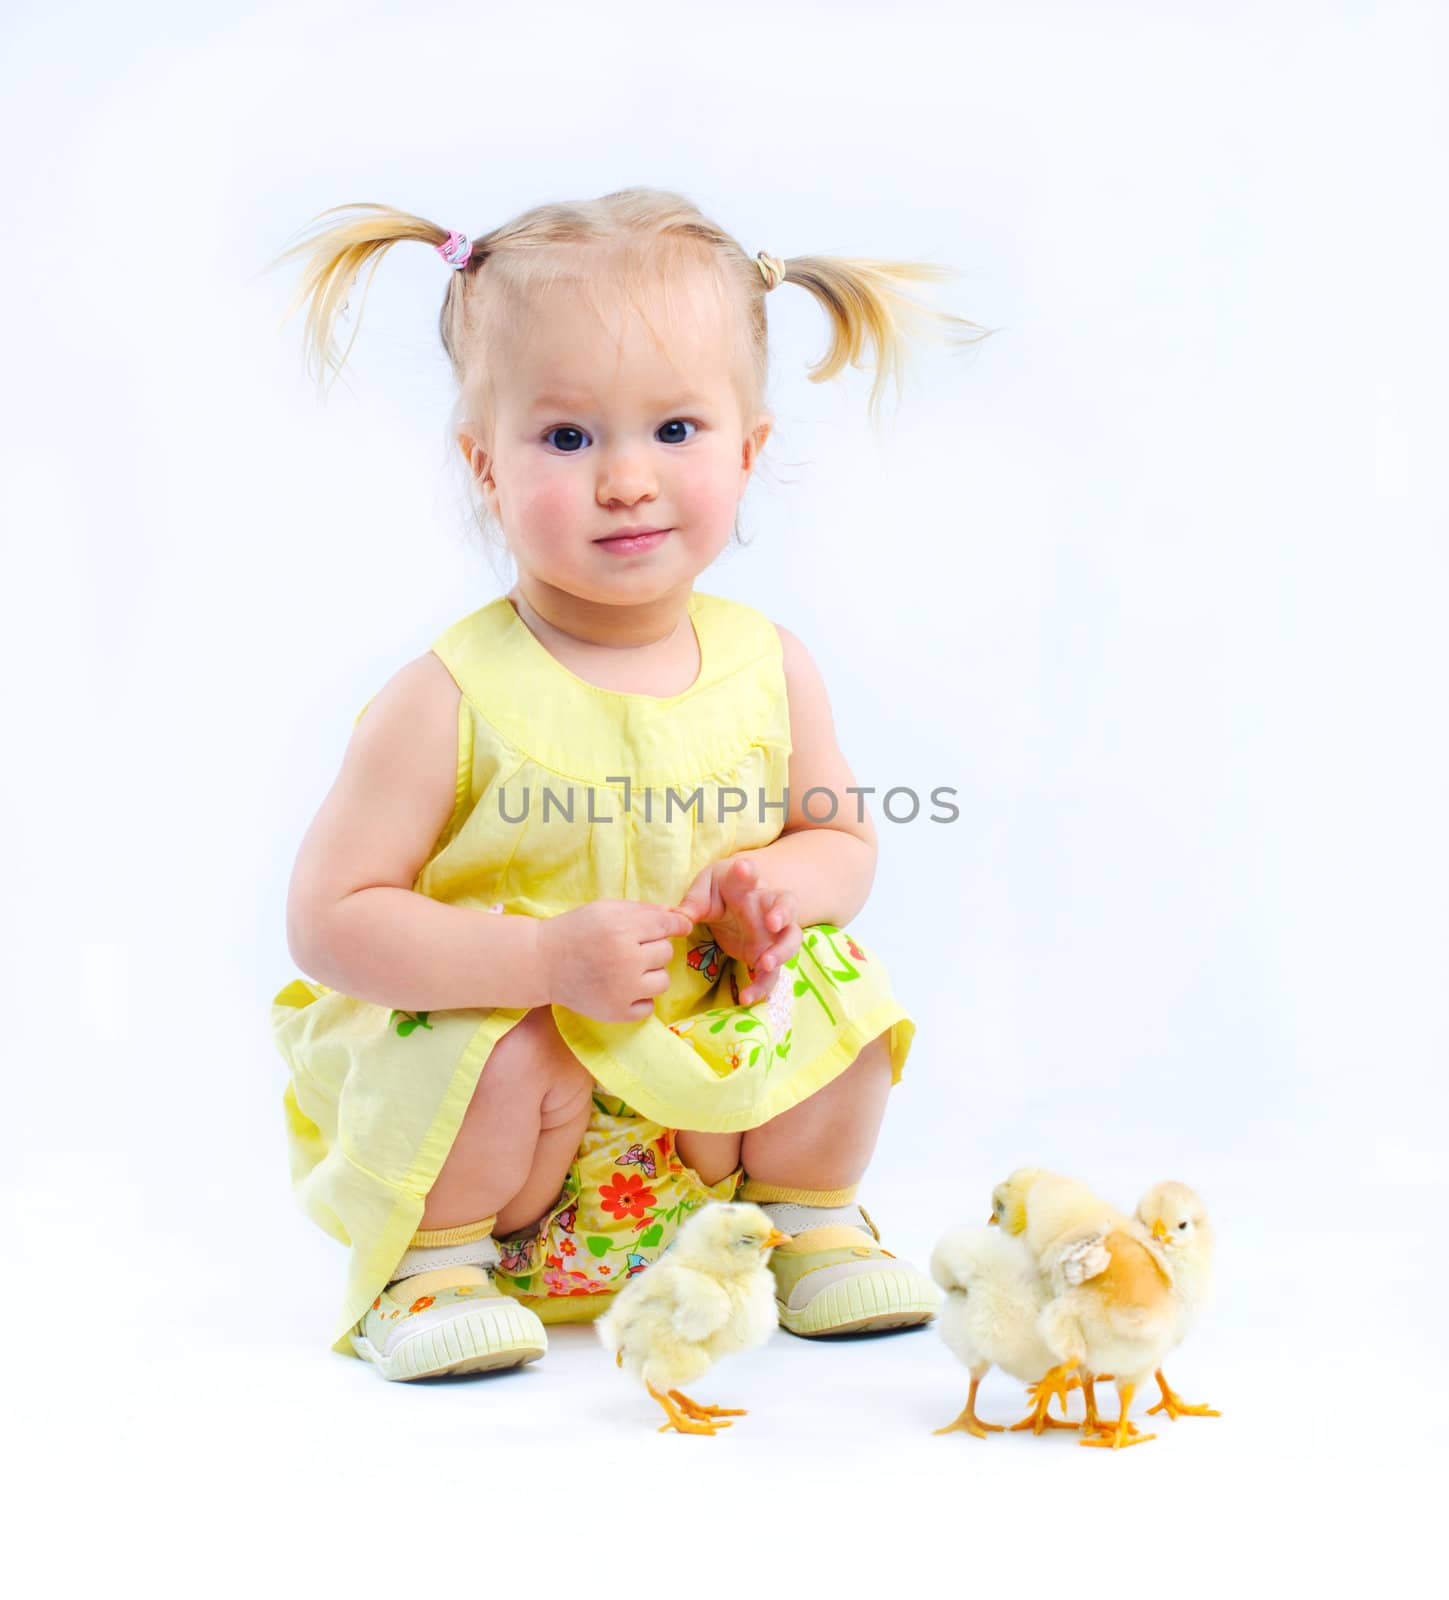 Cute little baby girl in a yellow dress with really live chickens. In the studio. Isolated